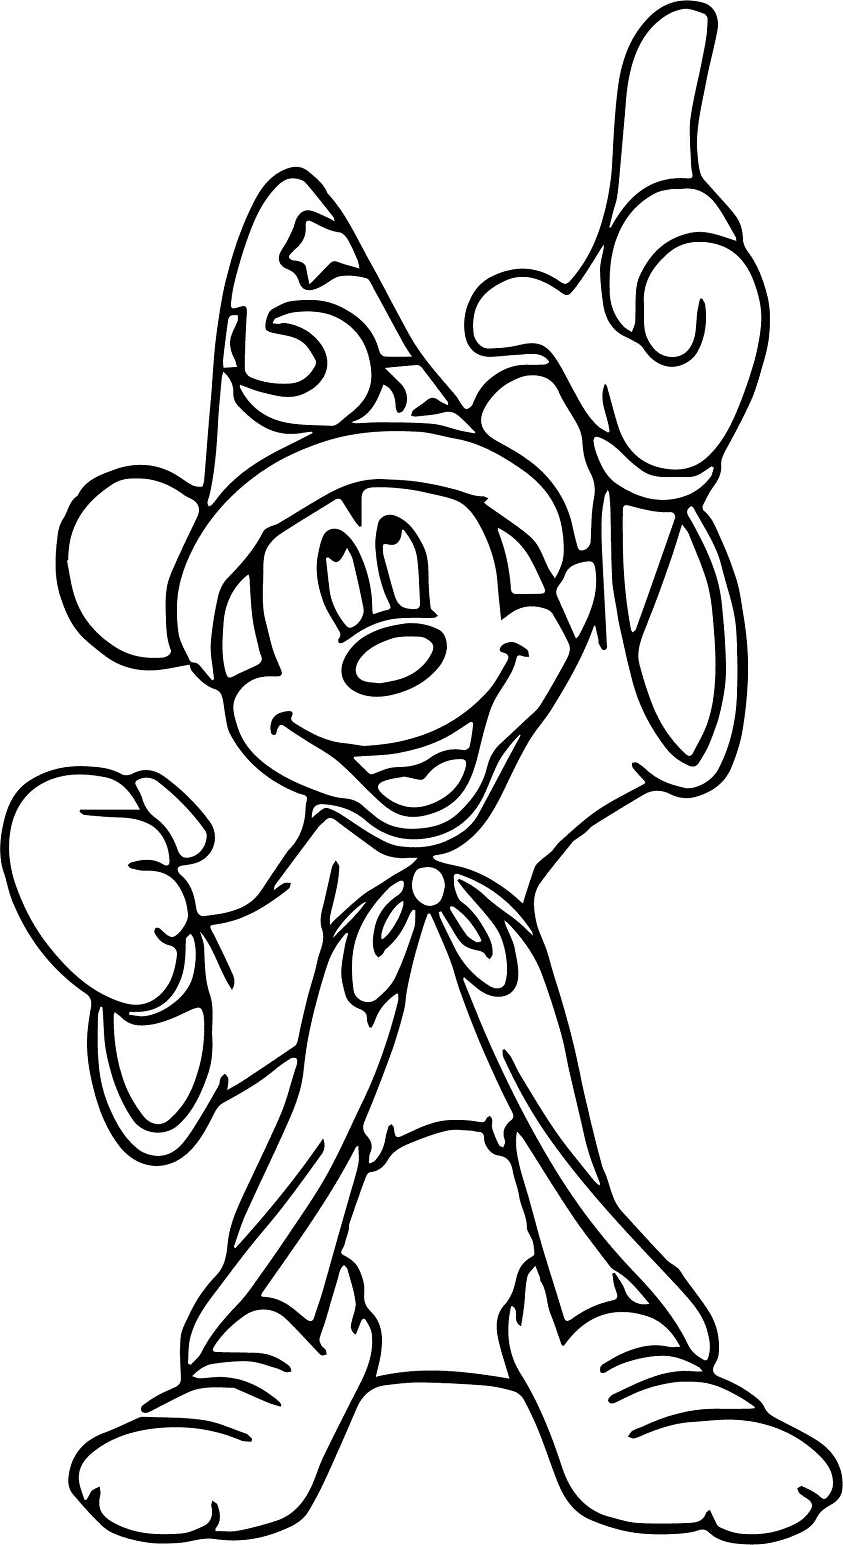 Awesome Mickey Fantasia Coloring Page